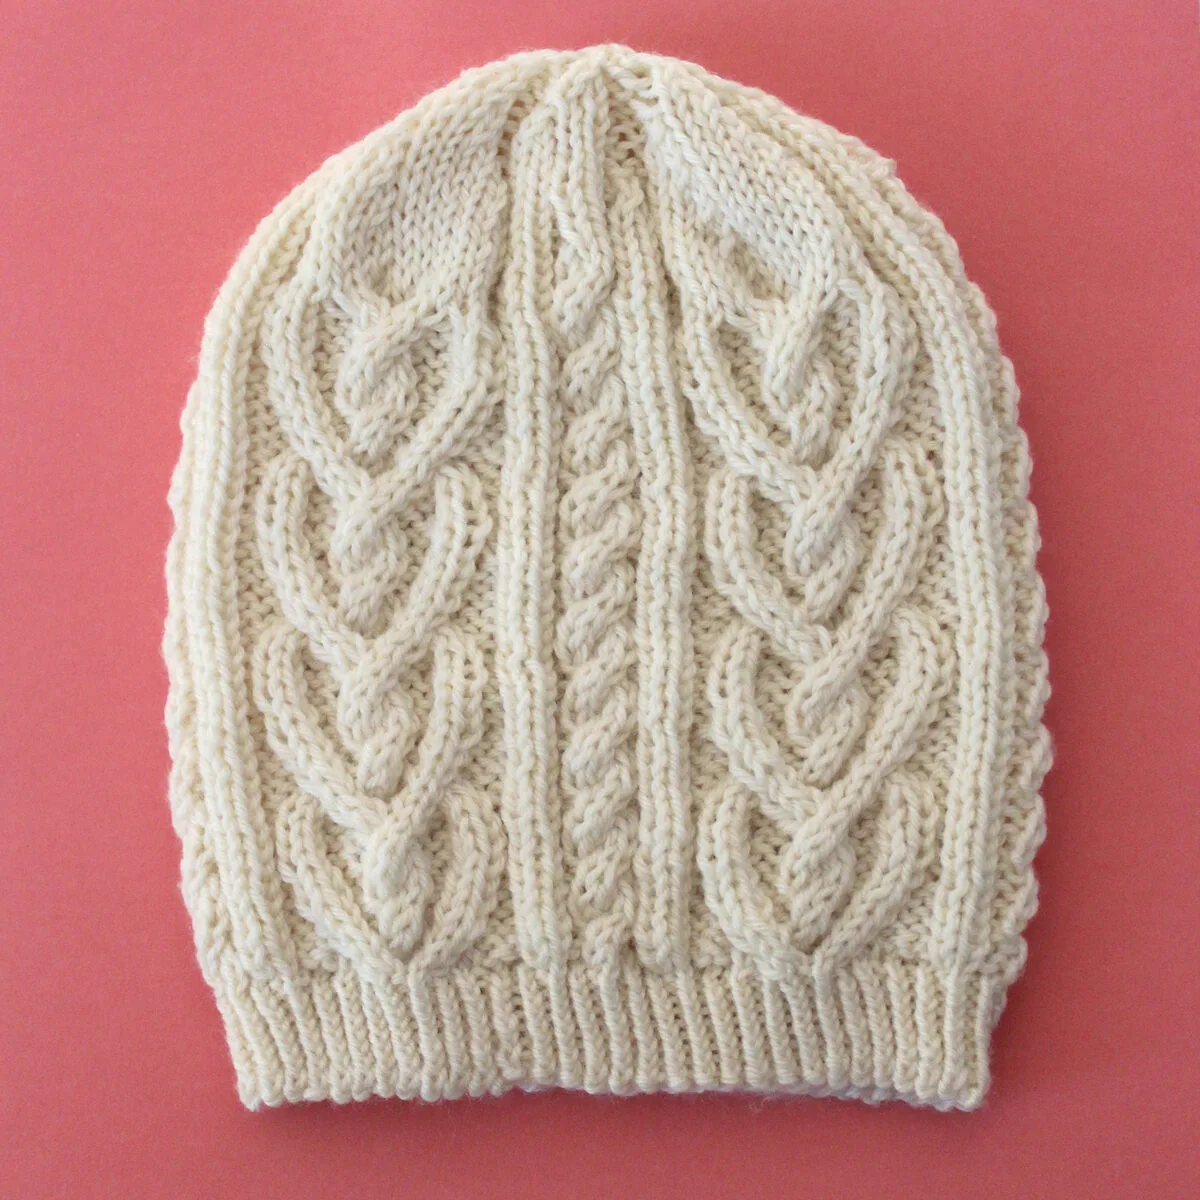 Easiest Knitted Hat EVER - PDF Knitting Pattern & Video Tutorial